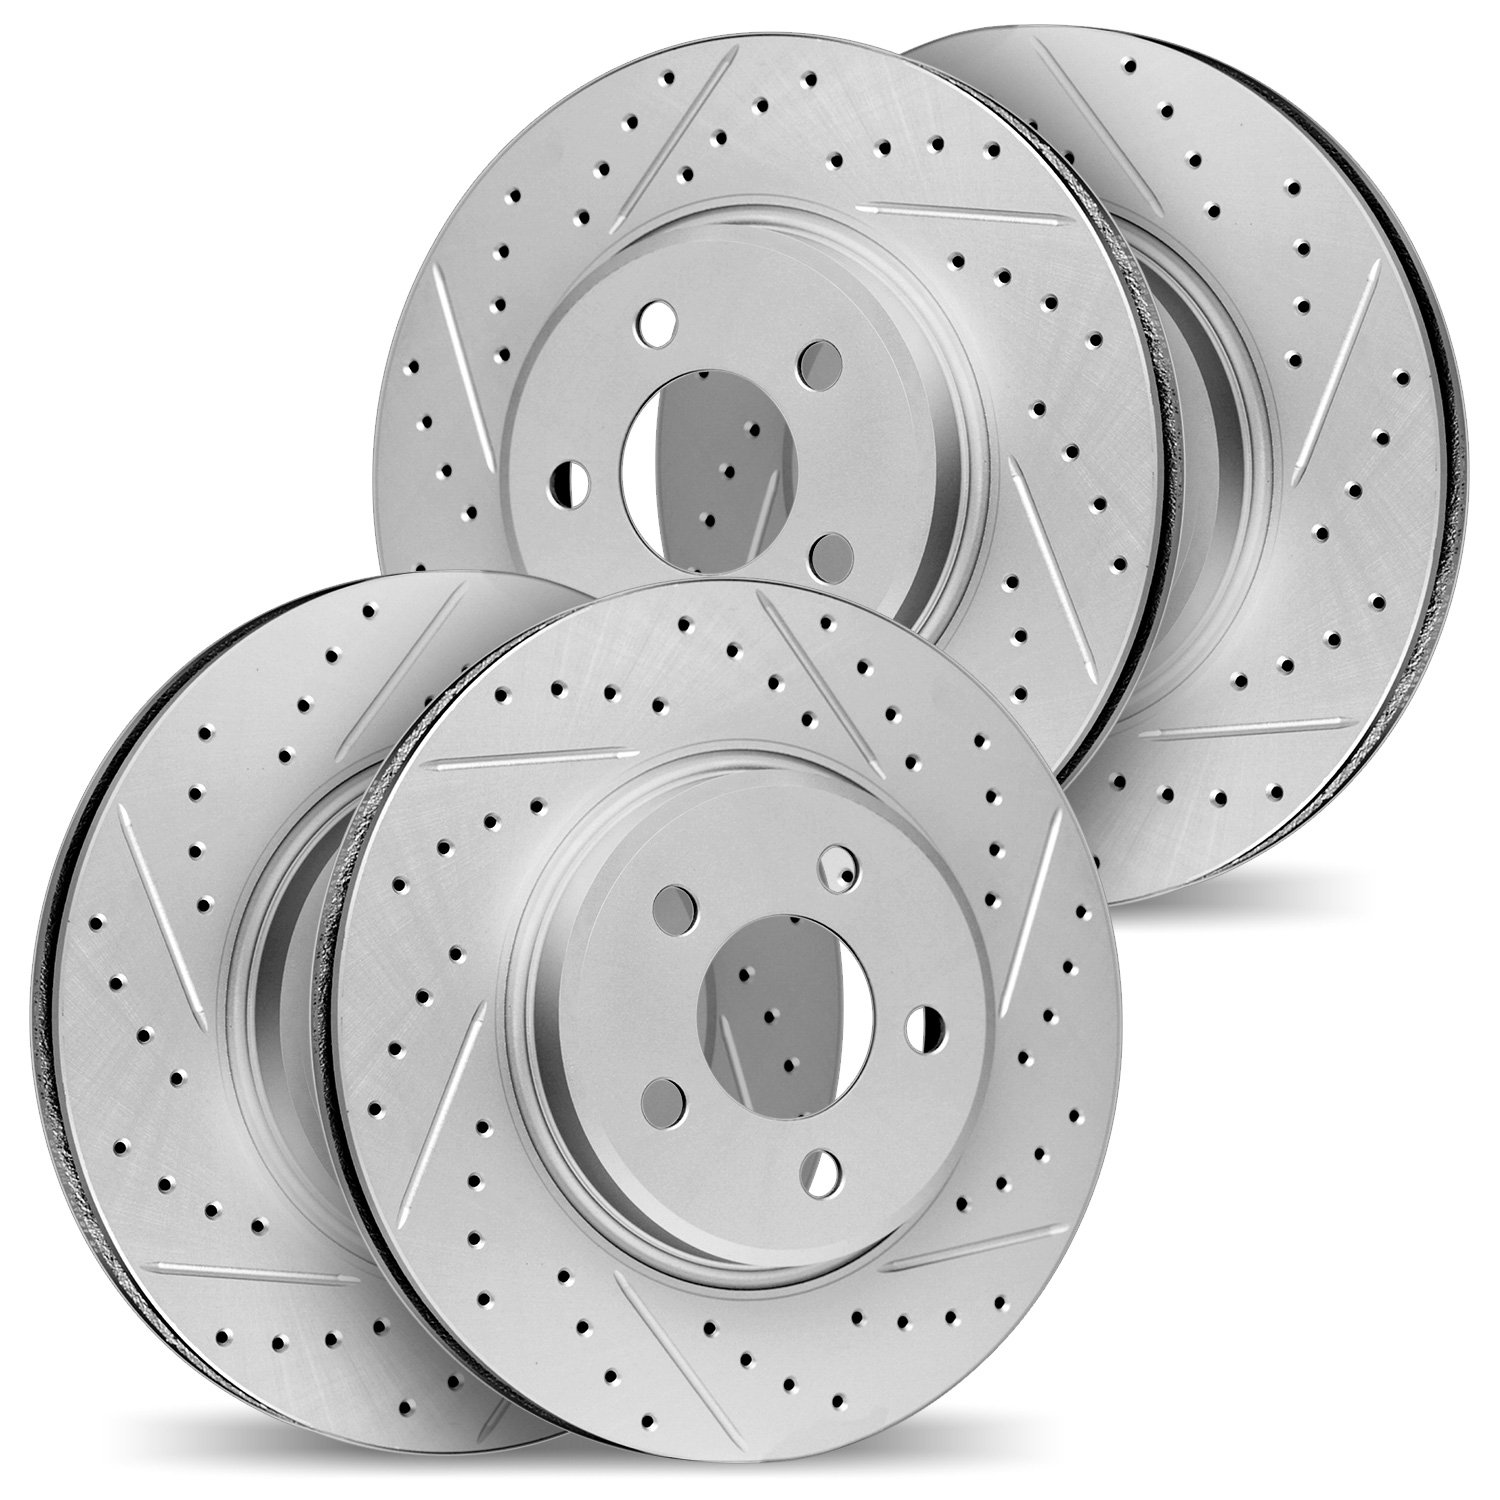 2004-73035 Geoperformance Drilled/Slotted Brake Rotors, 2004-2005 Audi/Volkswagen, Position: Front and Rear